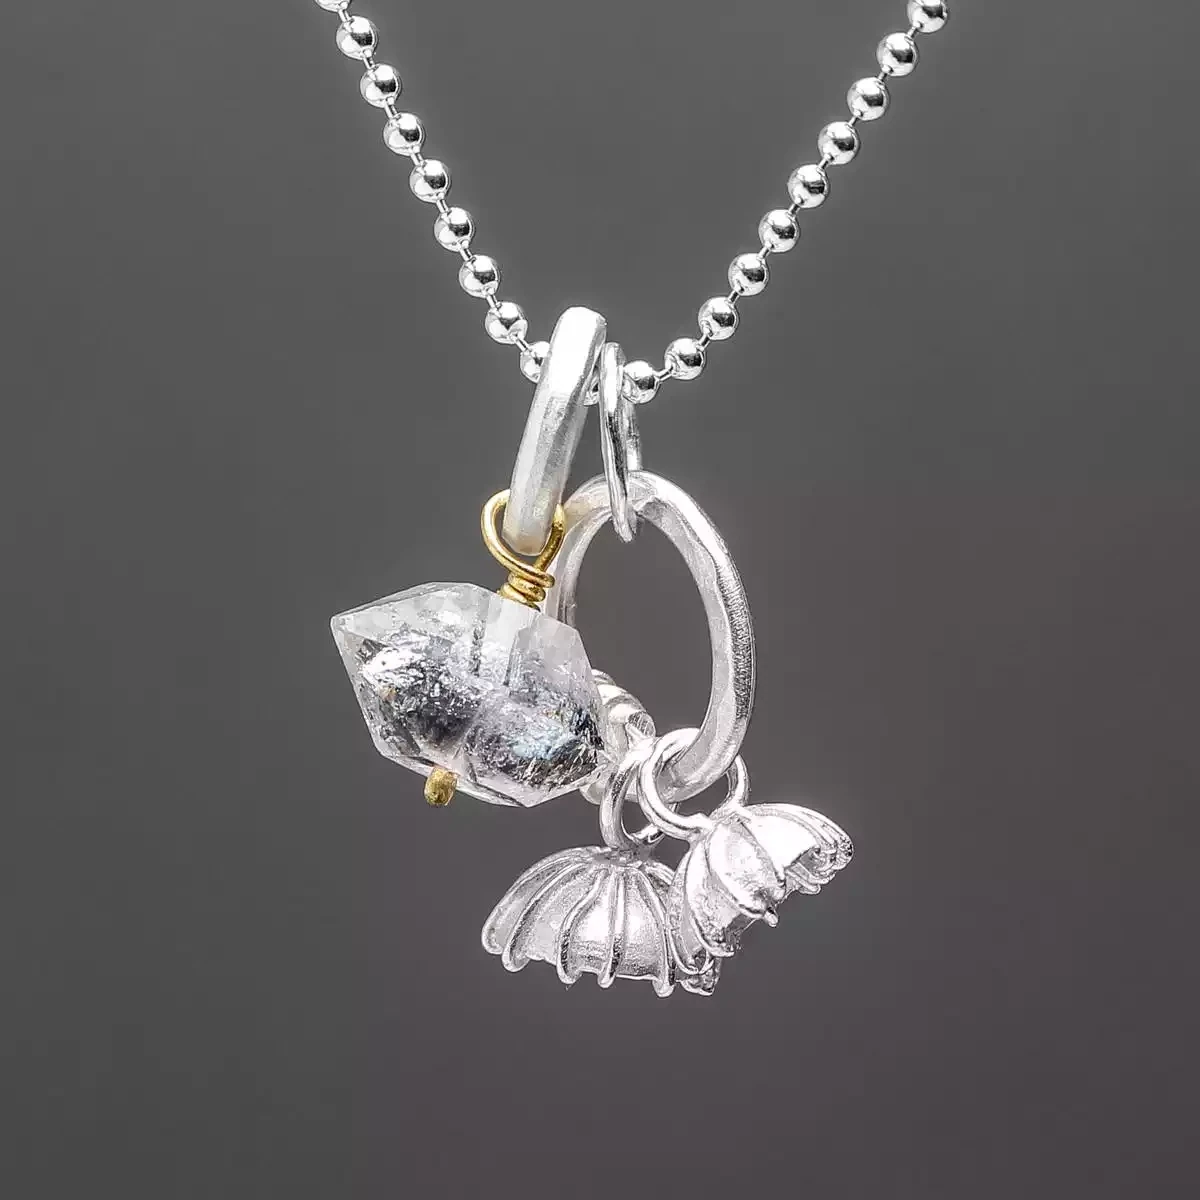 hoardings ring and cups silver pendant - herkimer diamond by adele taylor